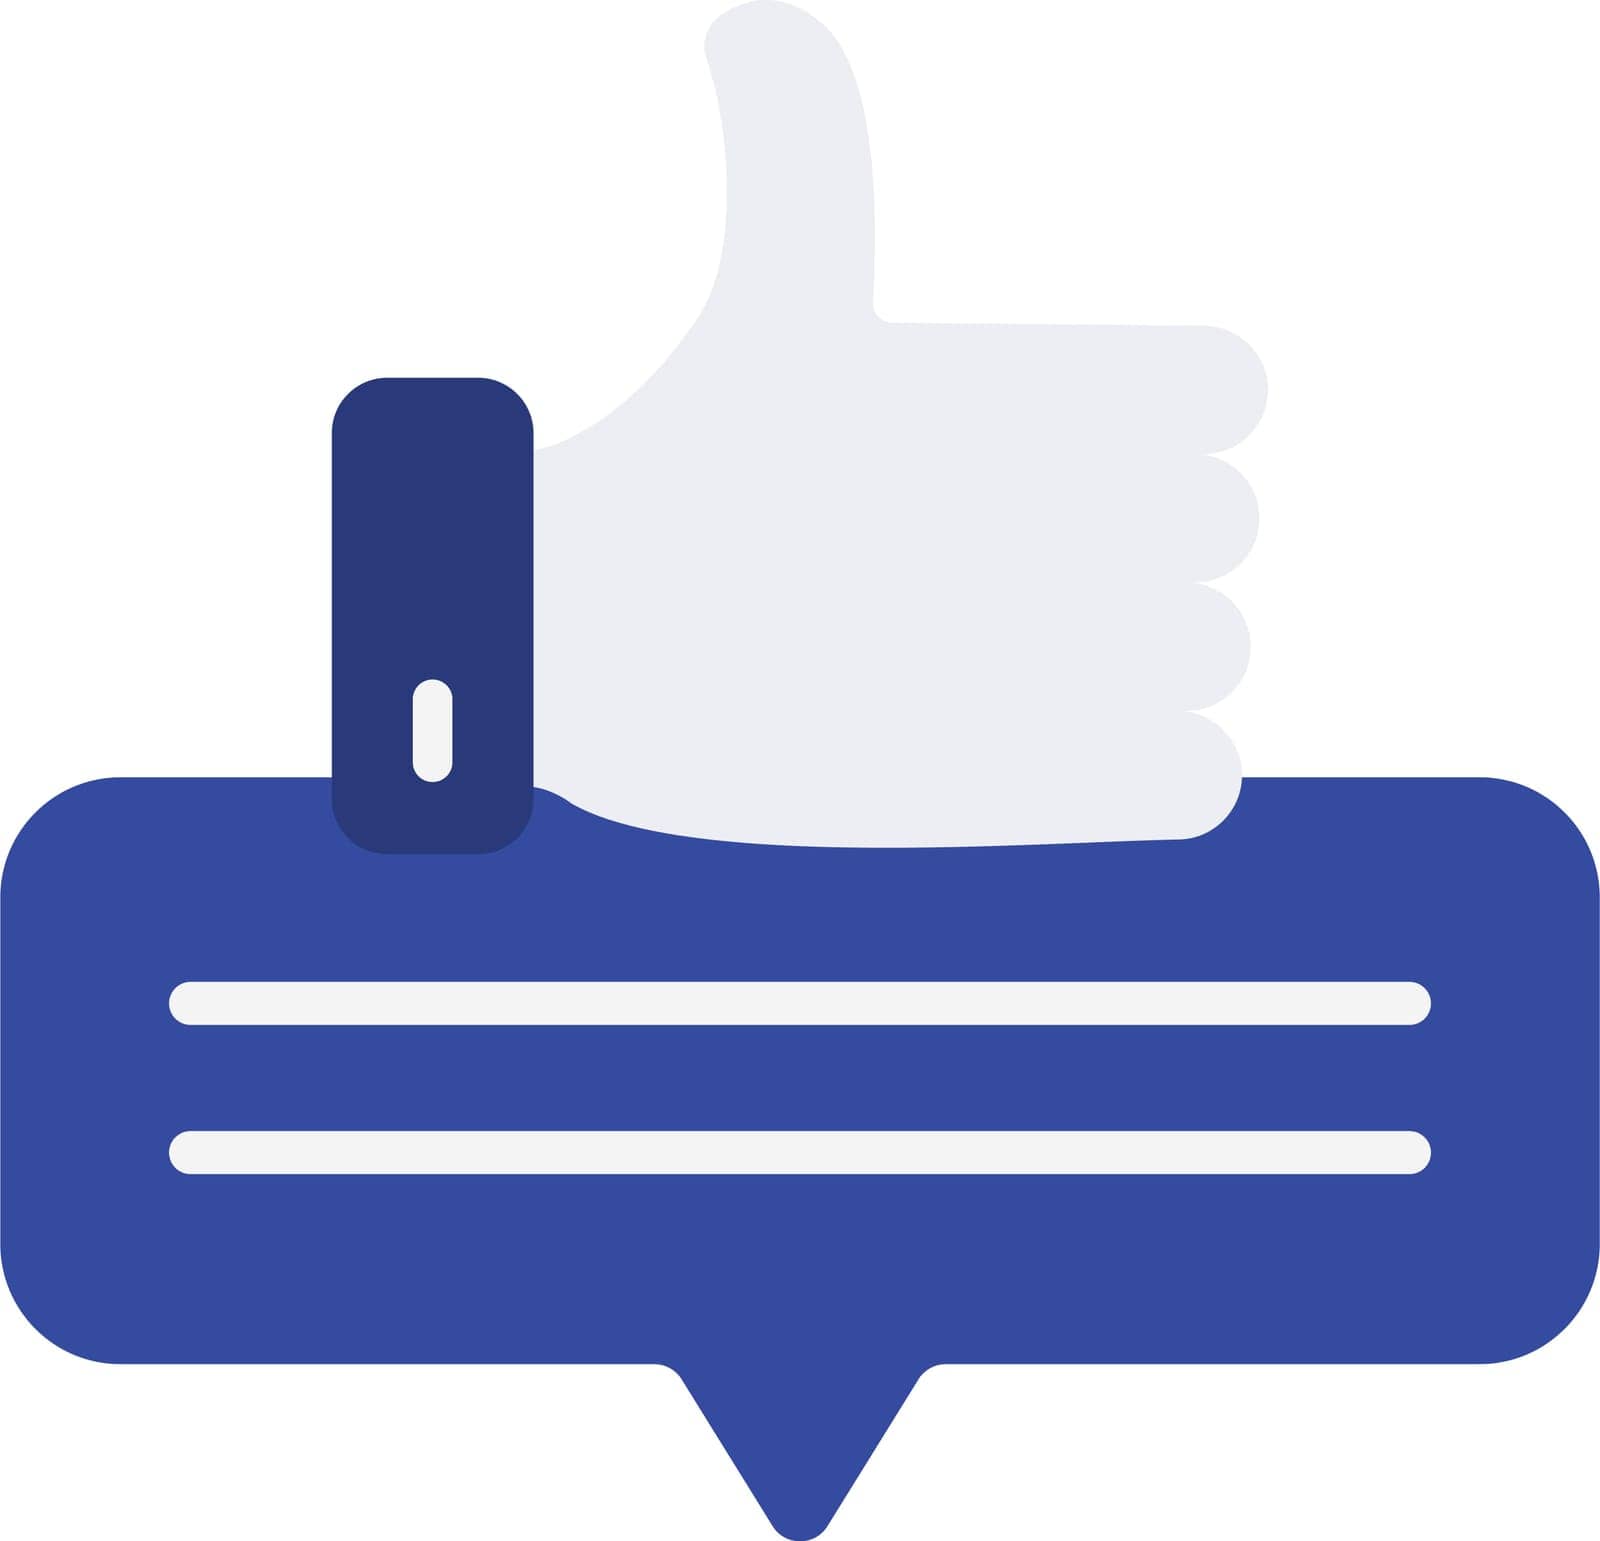 Right Feedback Icon image. Suitable for mobile application.